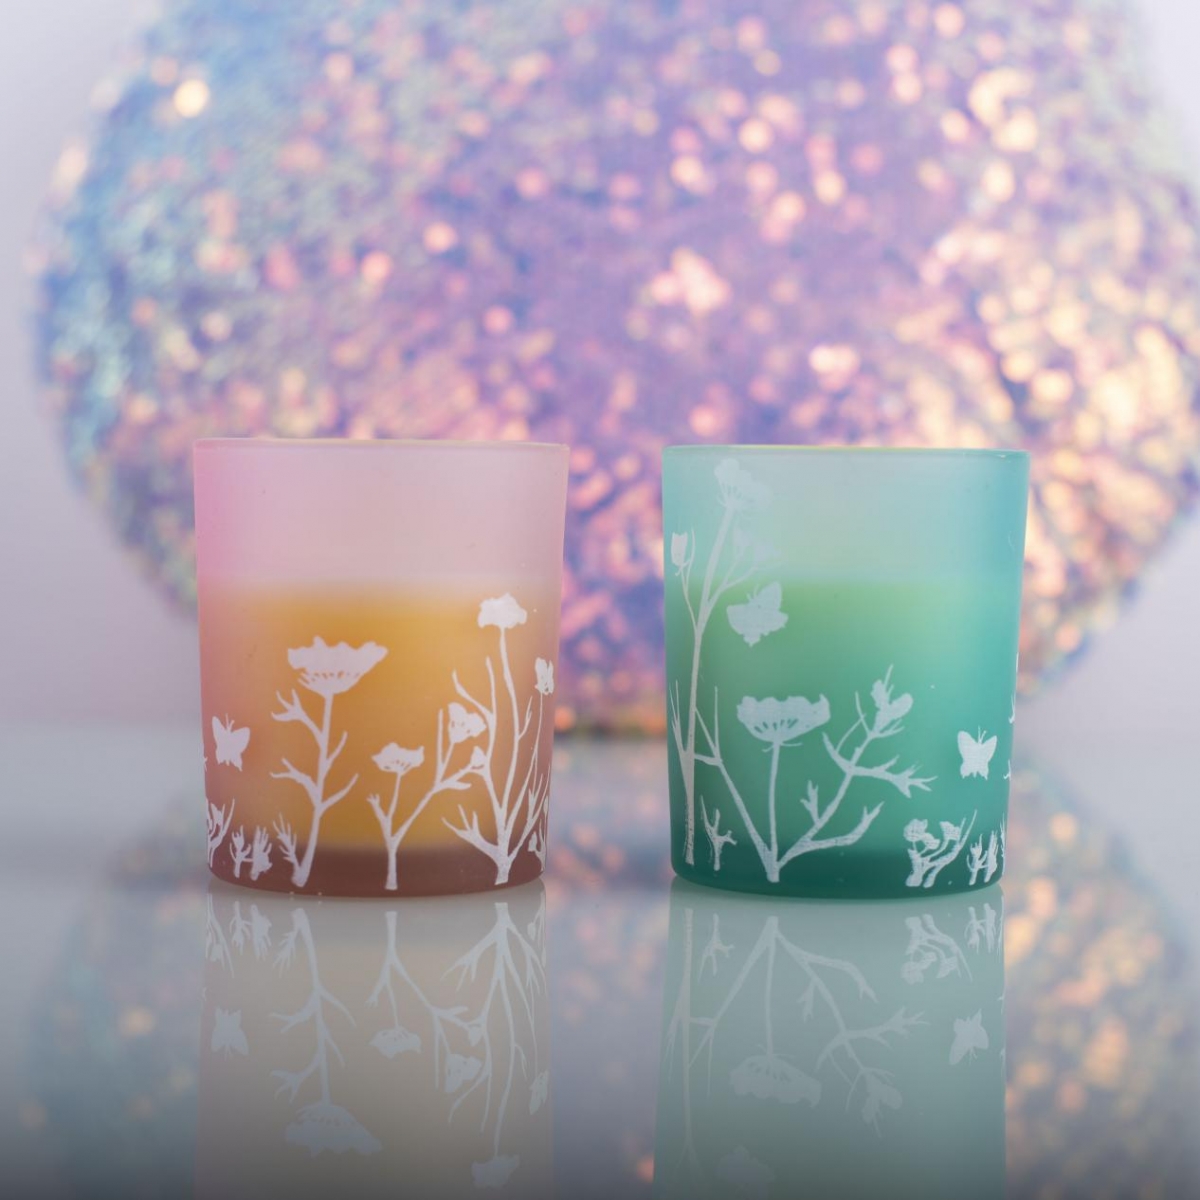 Scented Candles : Flower And Buttlefly , Pink Candle Jar , Soy Candles ,China Factory , Cheapest Price-HOWCANDLE-Candles,Scented Candles,Aromatherapy Candles,Soy Candles,Vegan Candles,Jar Candles,Pillar Candles,Candle Gift Sets,Essential Oils,Reed Diffuser,Candle Holder,